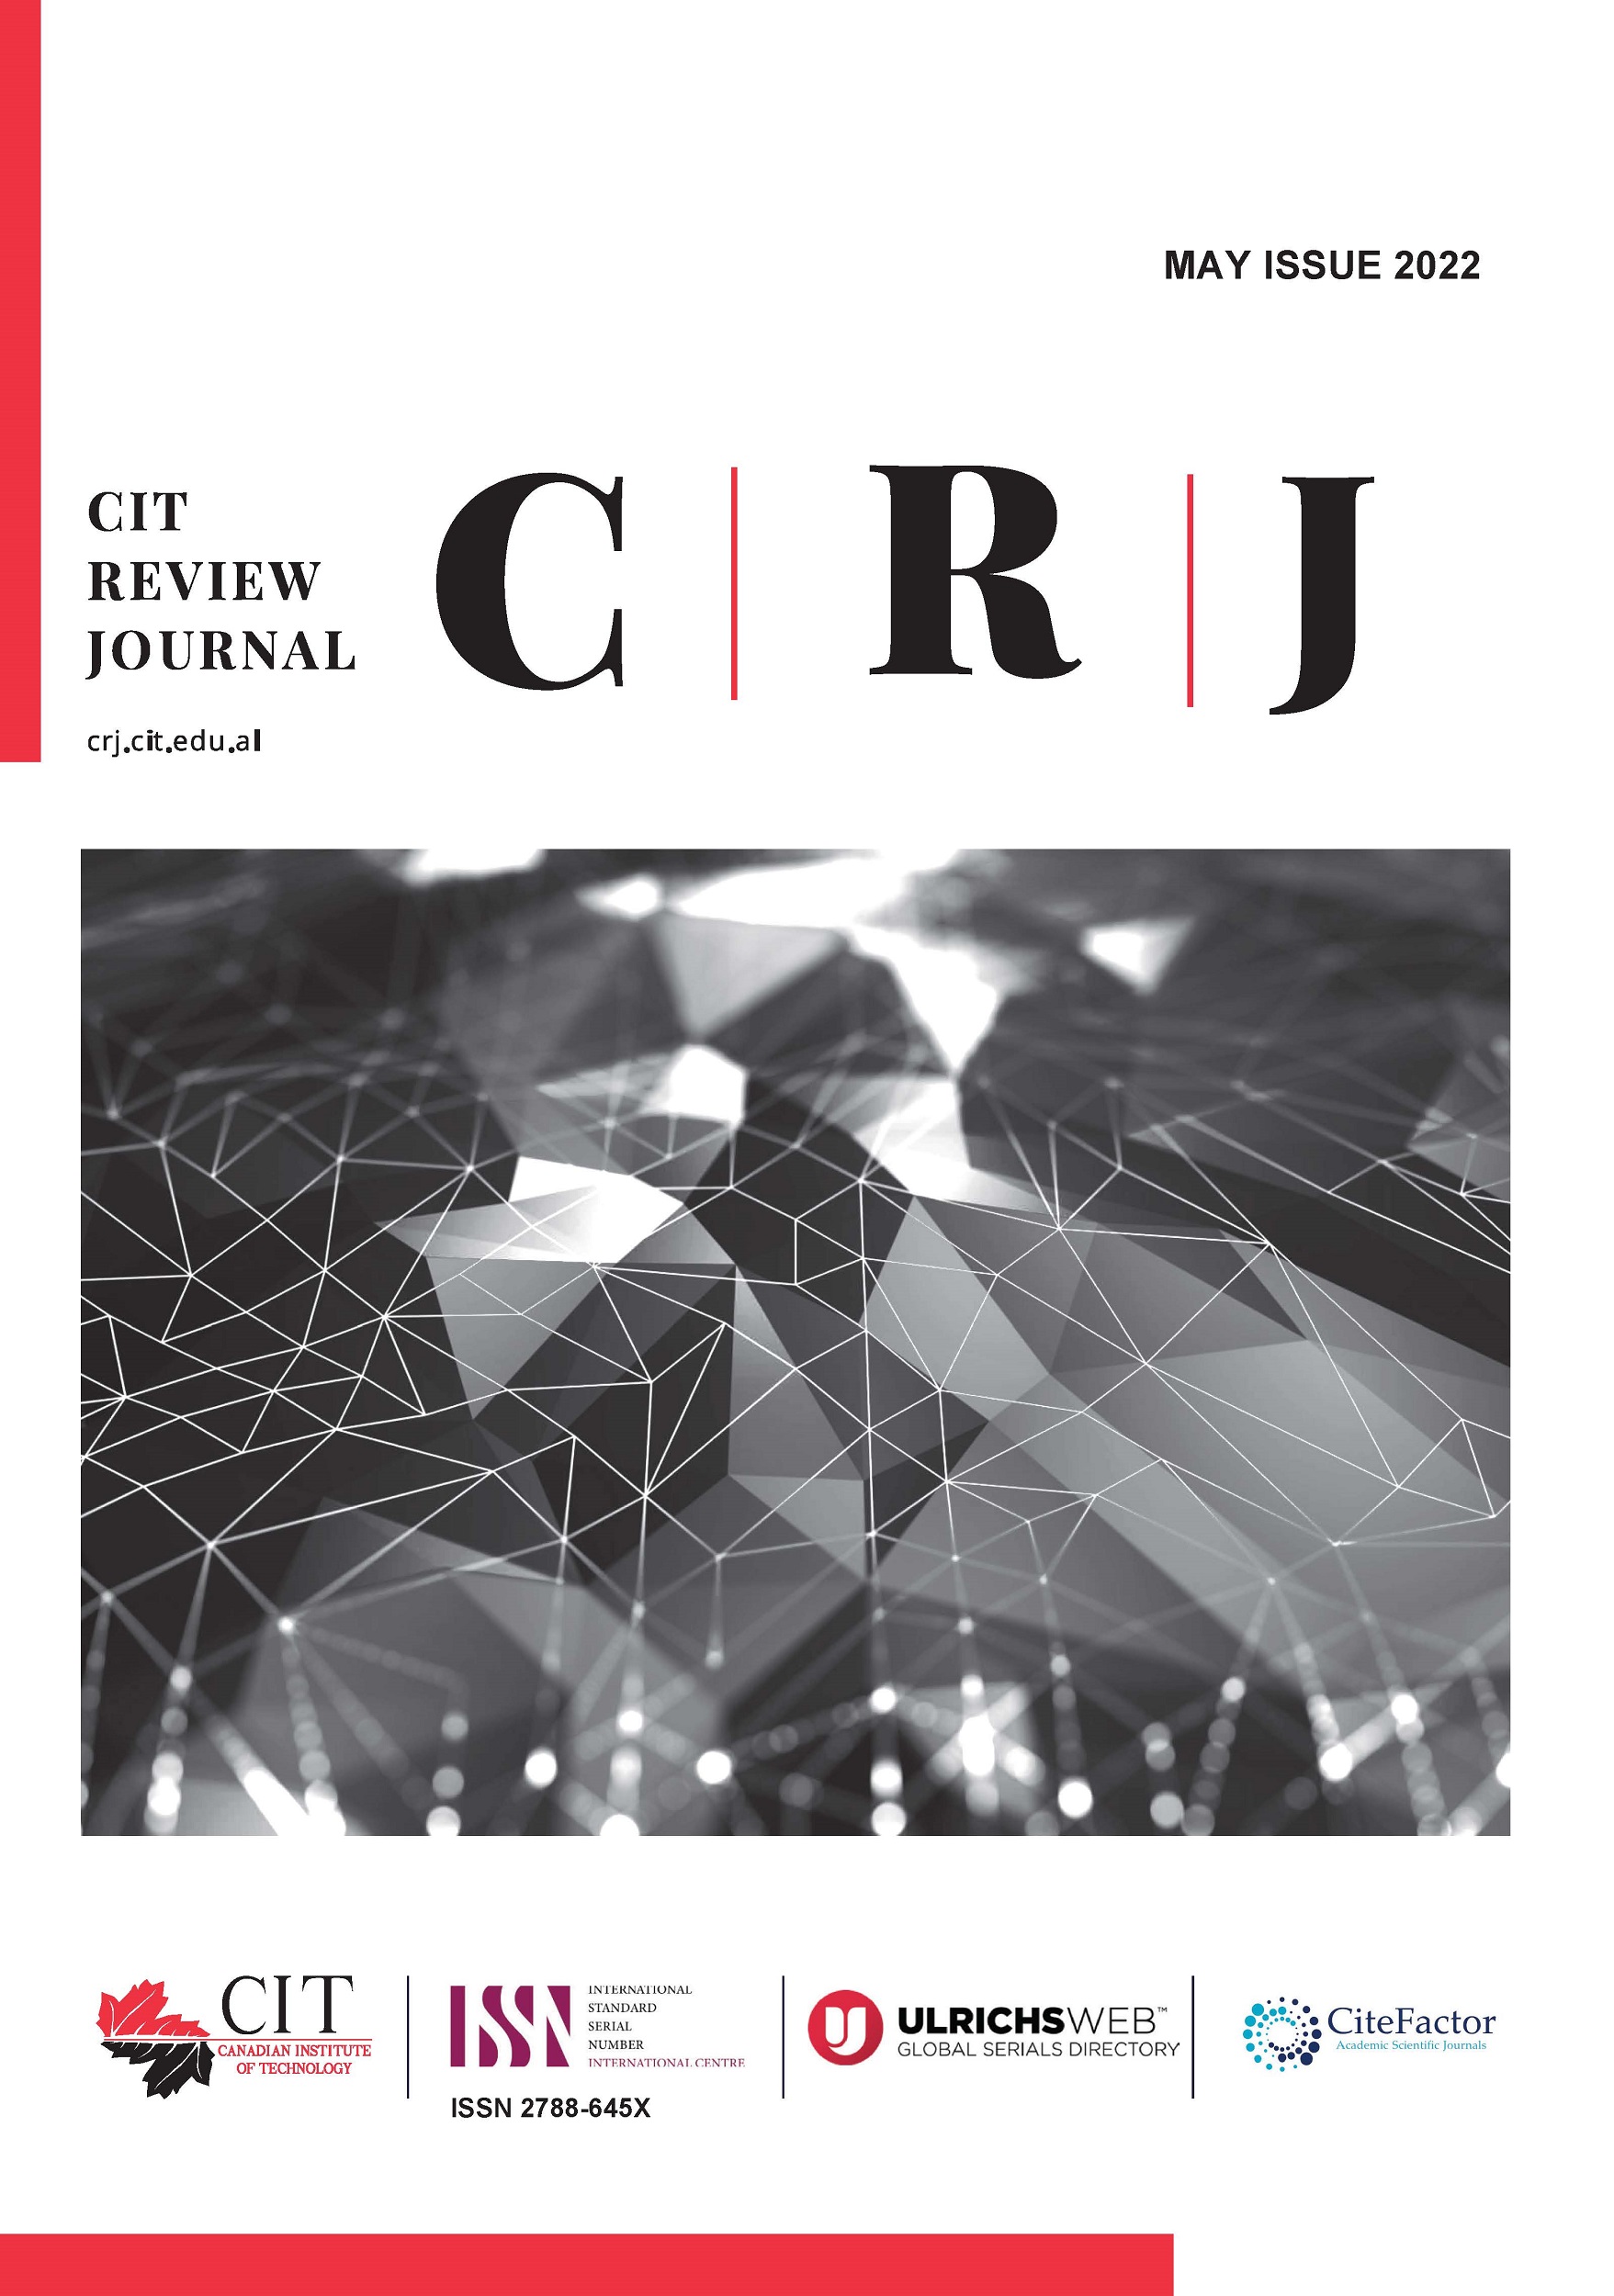 CIT Review Journal May Issue 2022